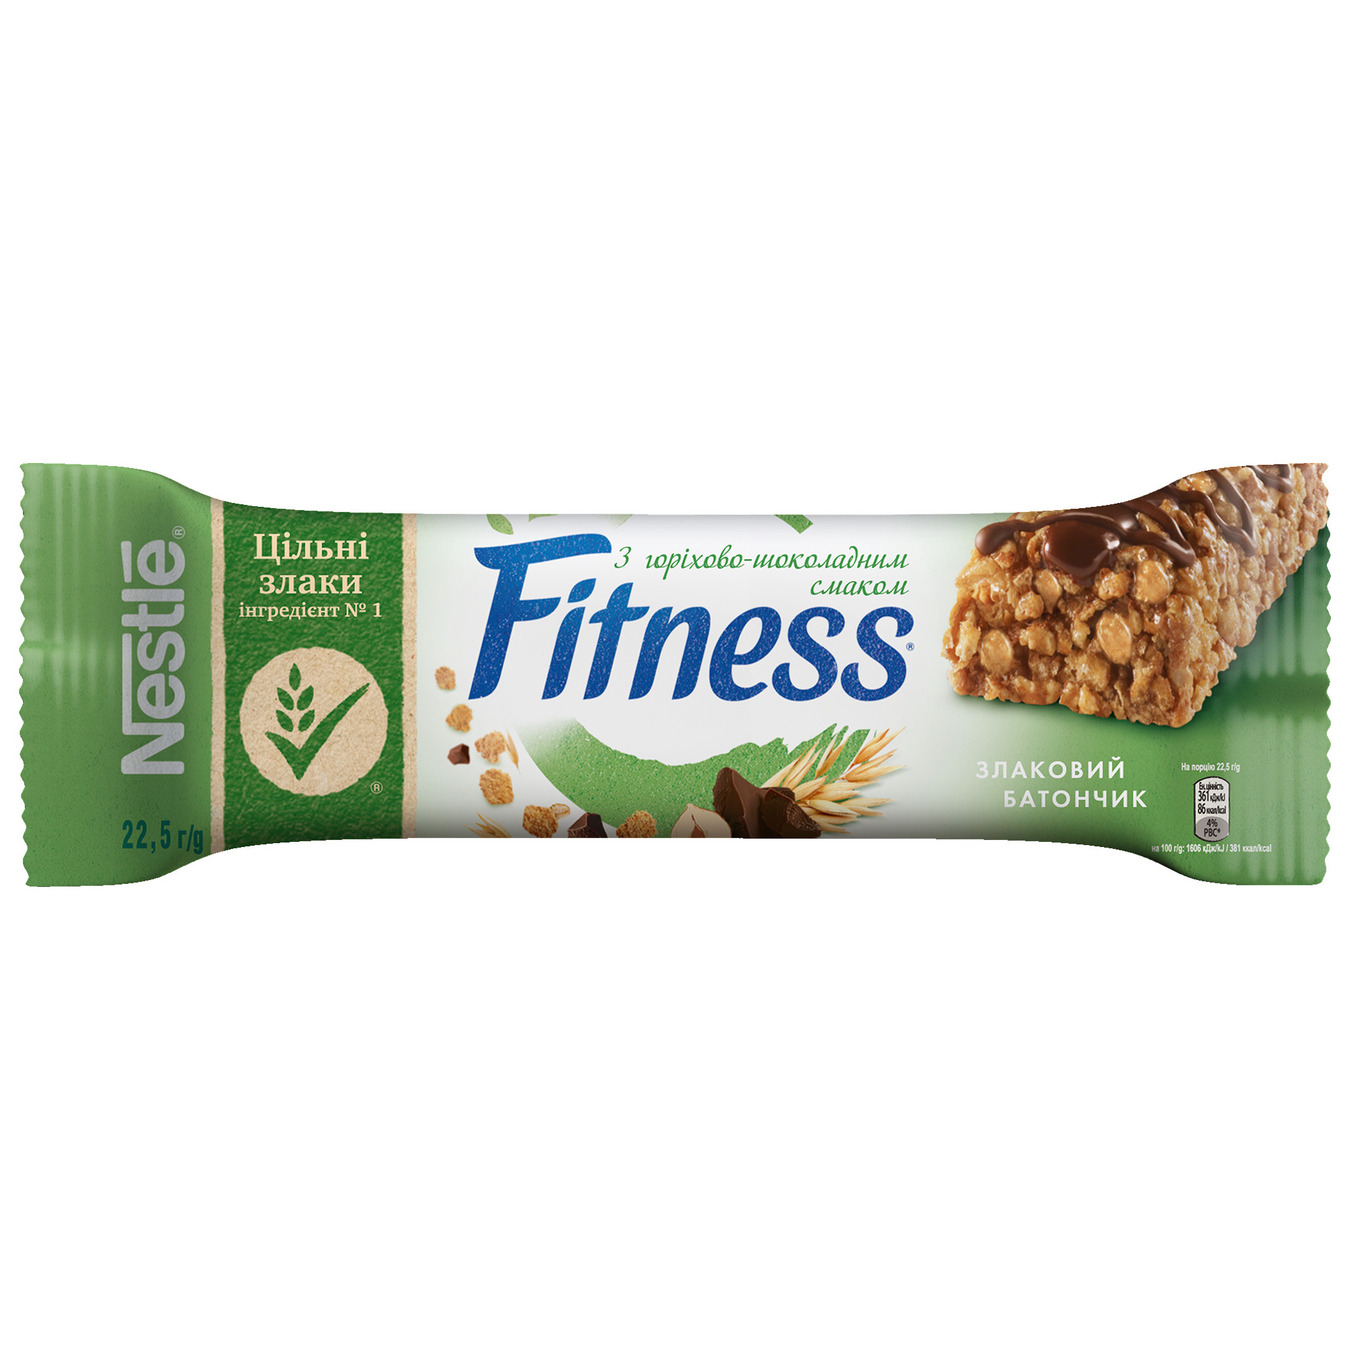 Cereal bar Fitness with nut-chocolate flavor 22.5g